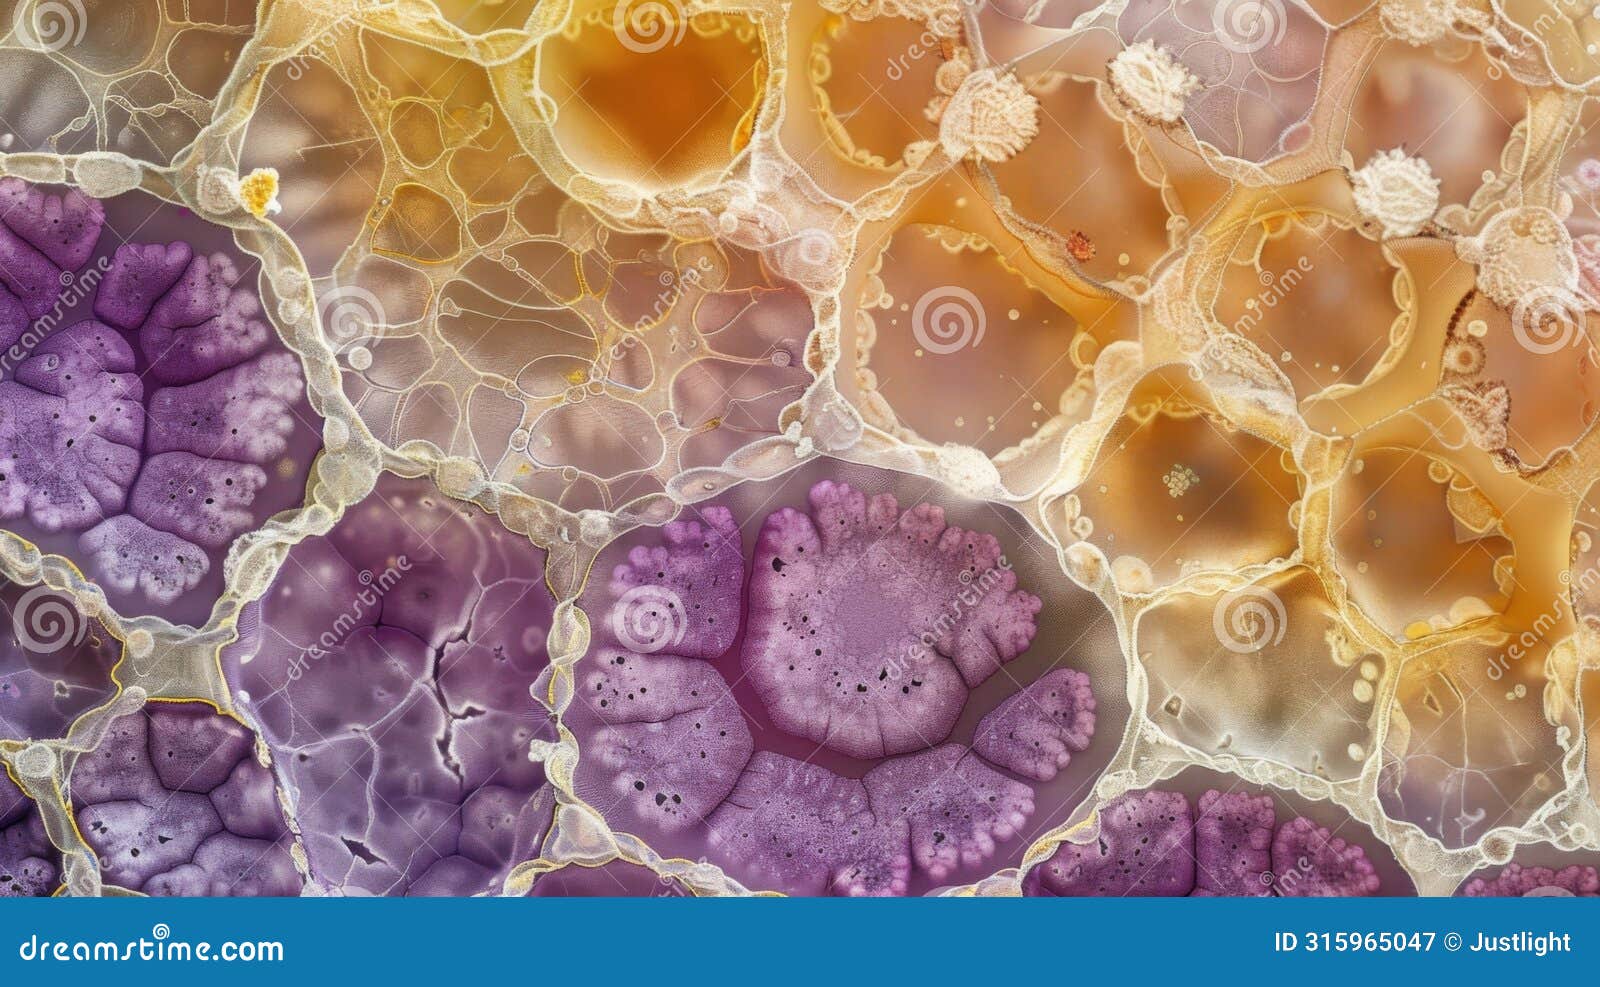 a microscopic view of a crosssection of a tree trunk showcasing the organized layers of plant cells involved in